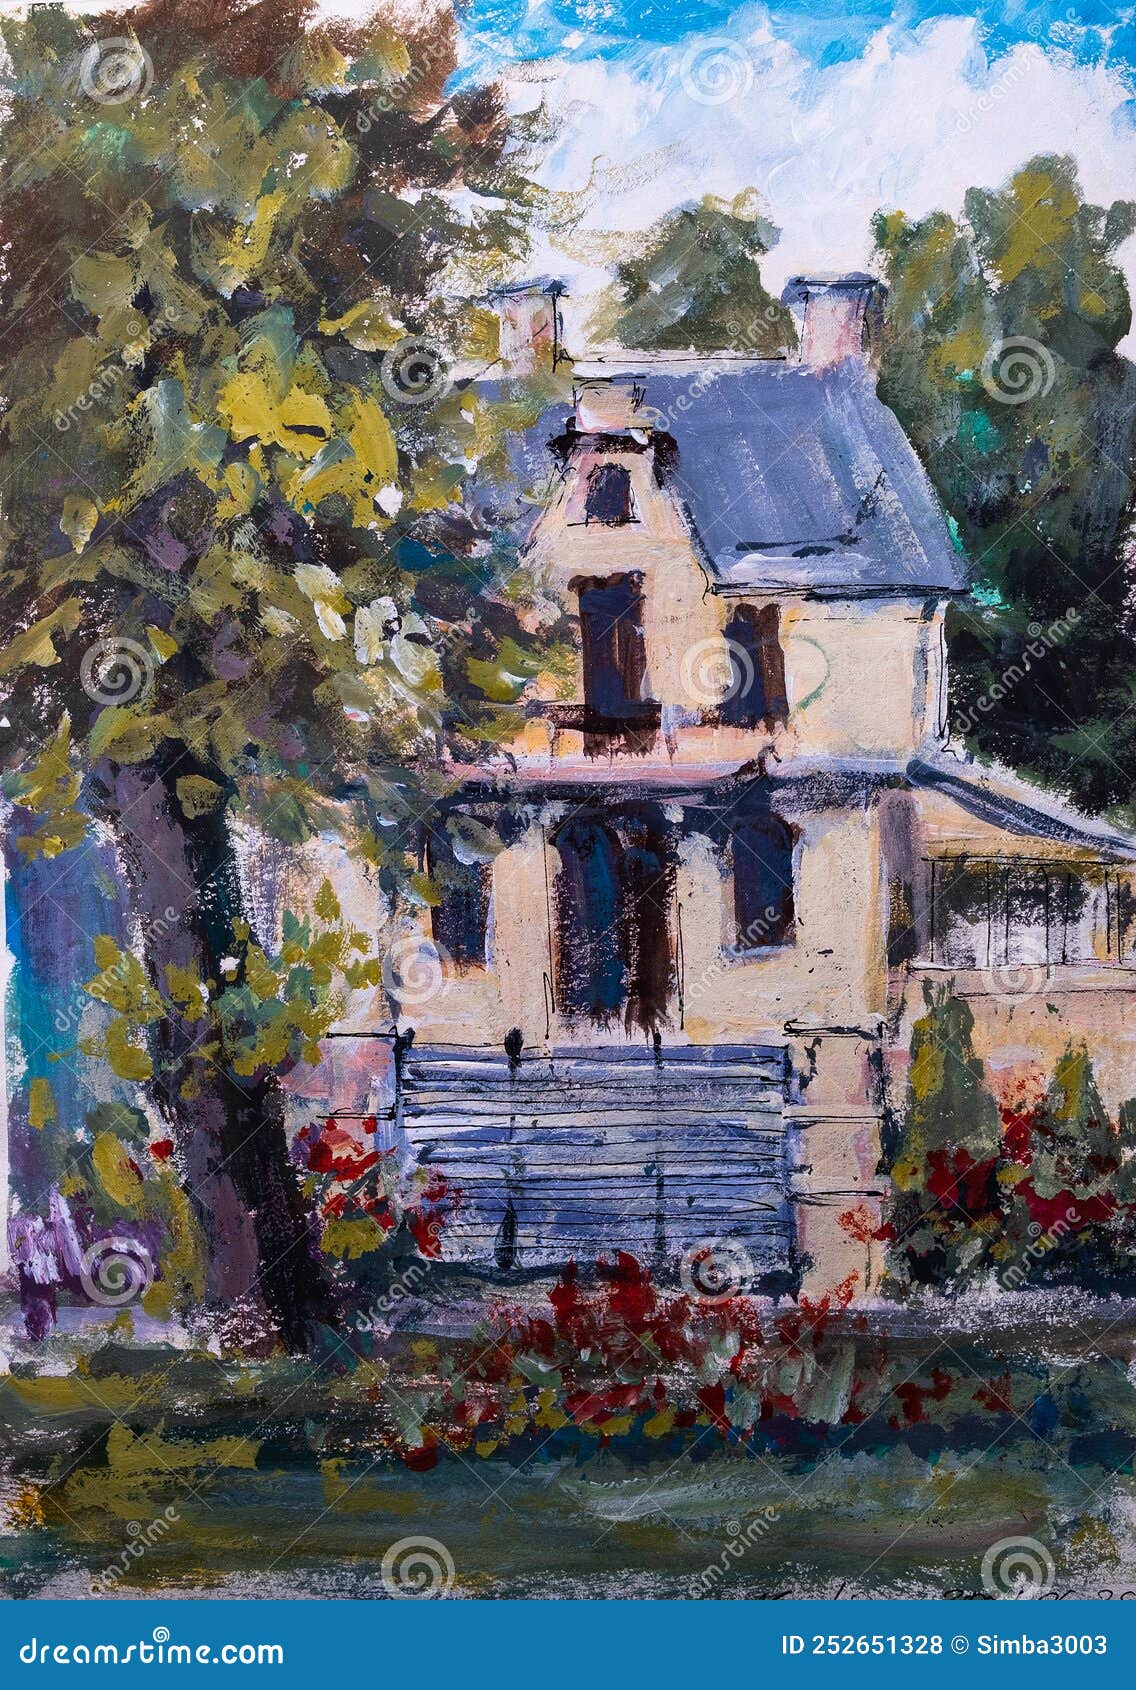 tempera sketch of old house